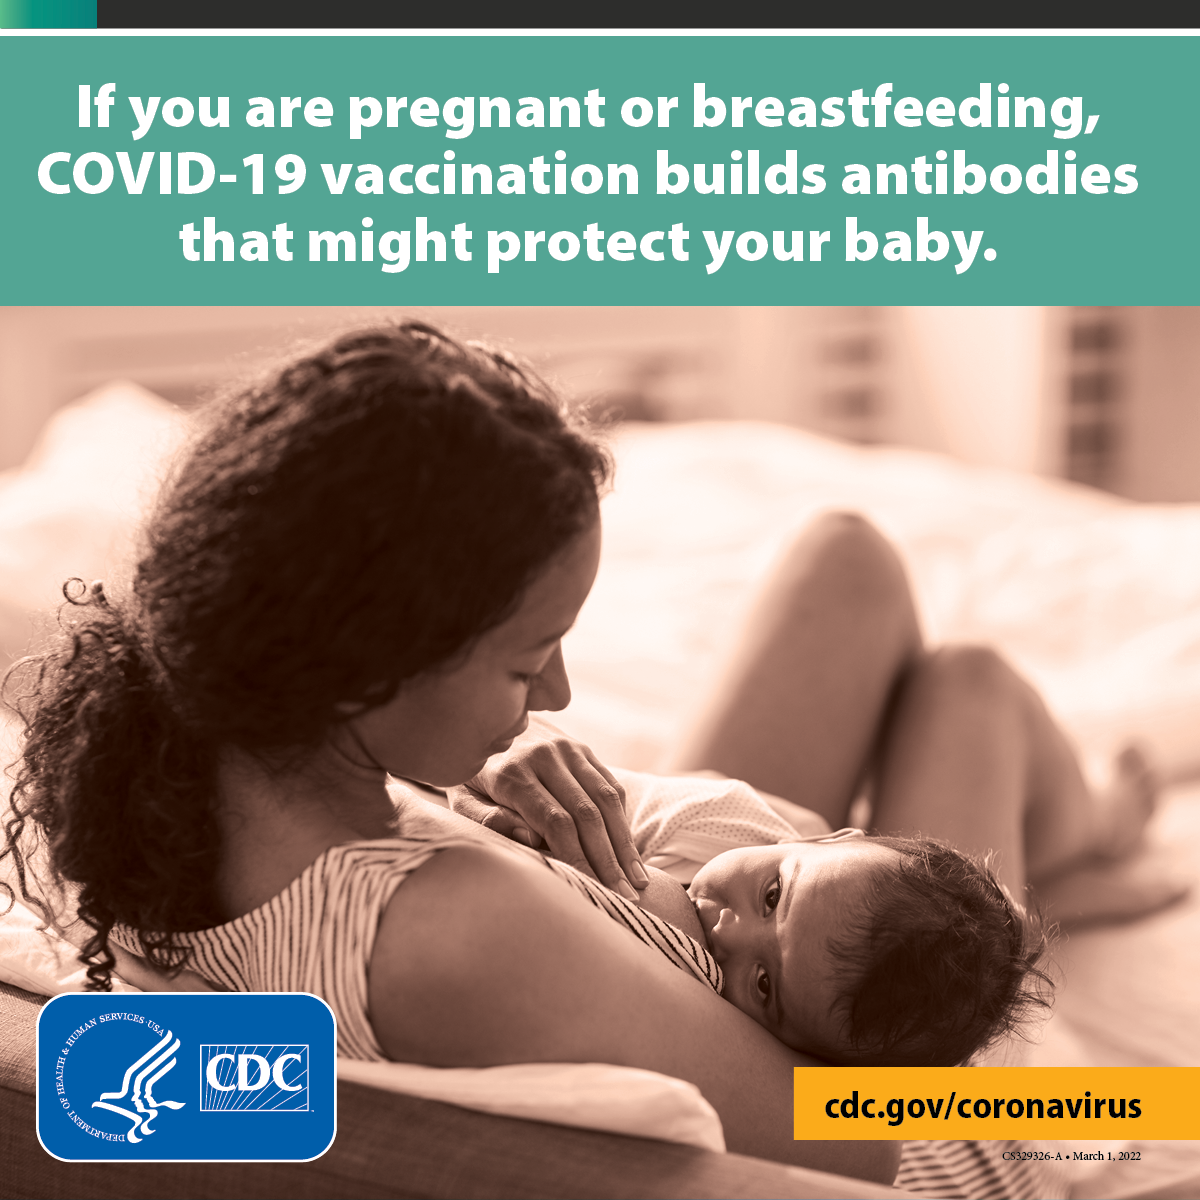 If you are pregnant or breastfeeding, COVID-19 vaccination builds antibodies that might protect your baby